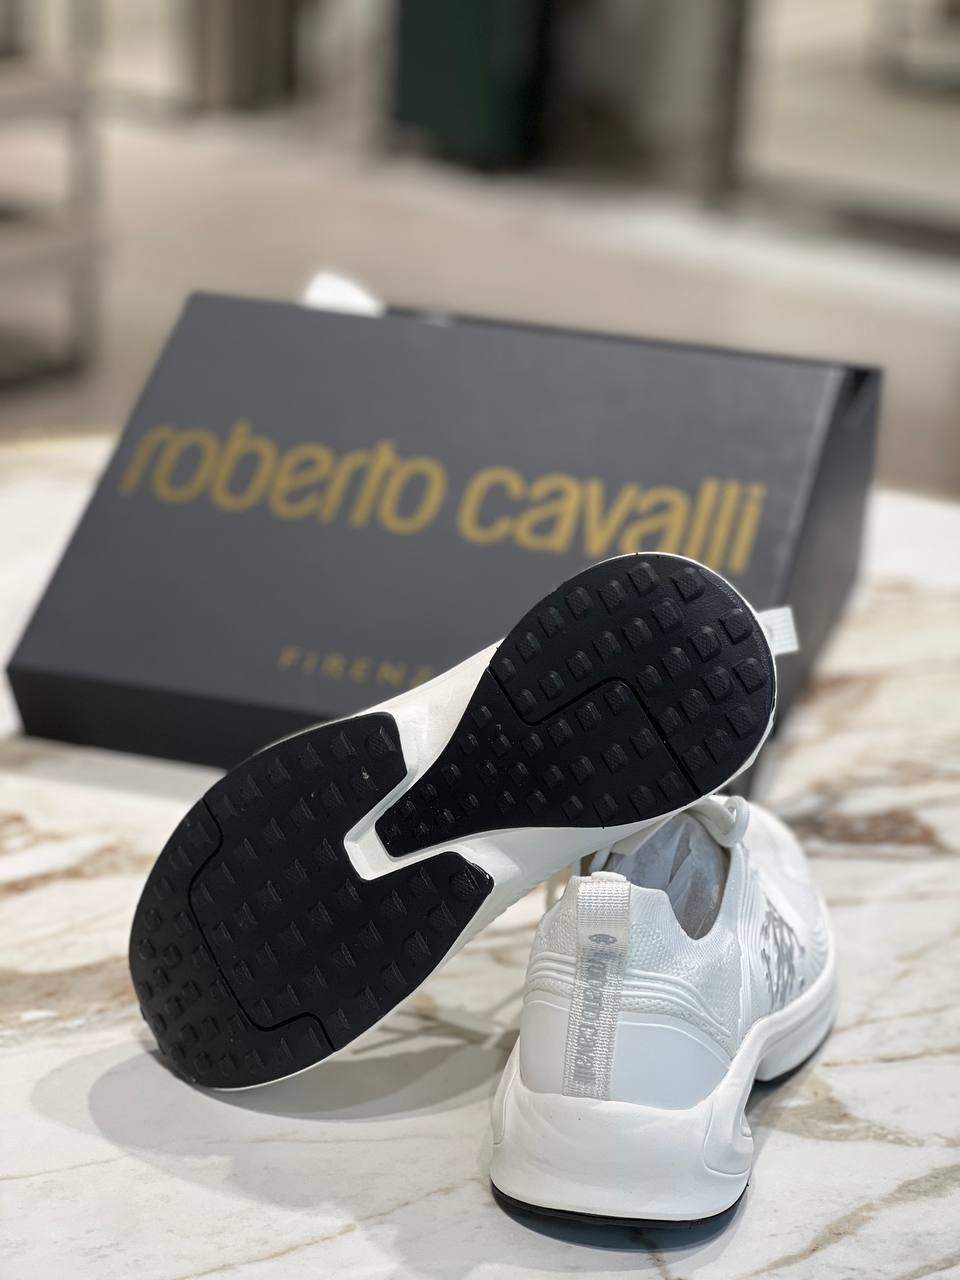 Roberto Cavalli Outlets 4701